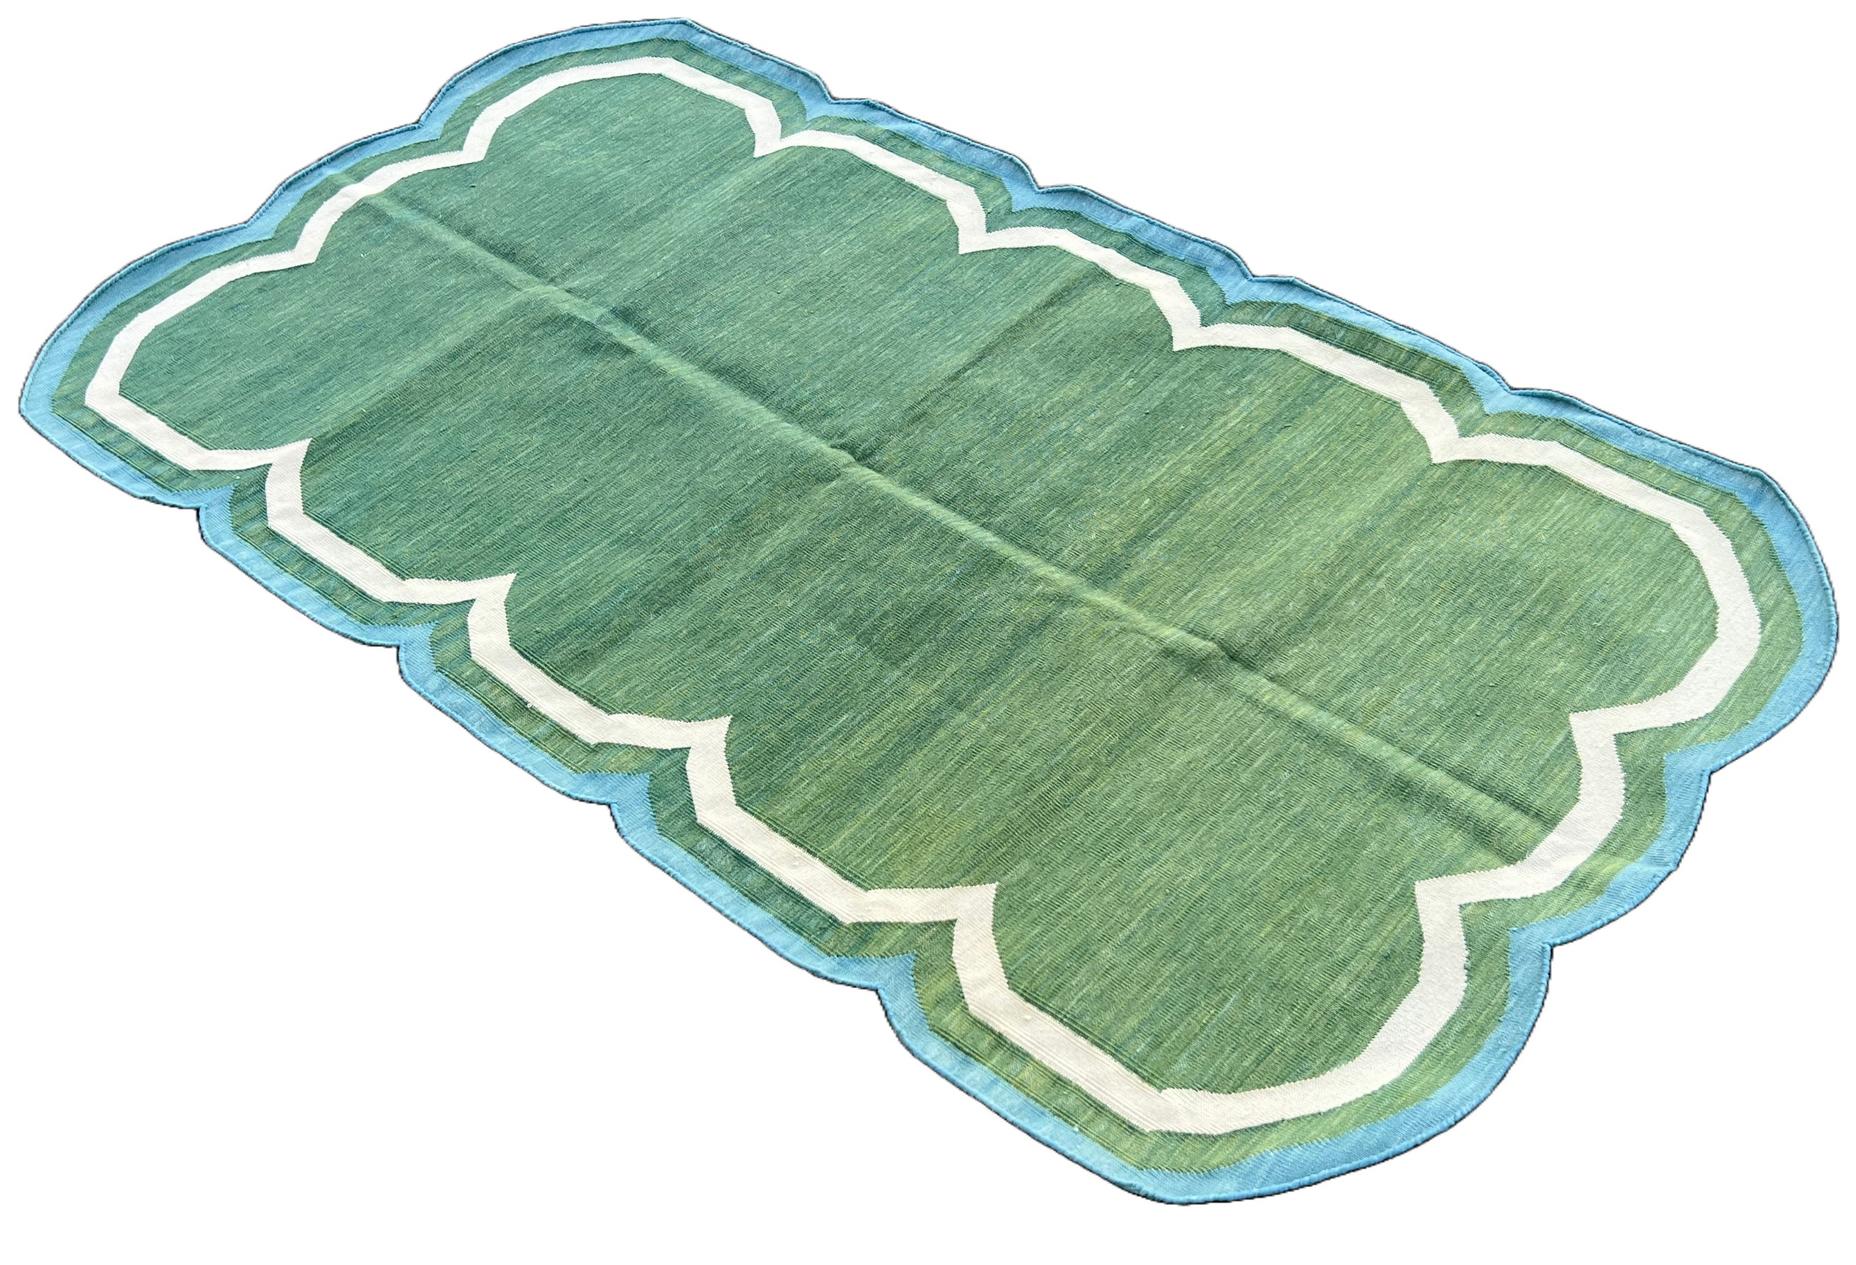 Cotton Vegetable Dyed Forest Green, Cream And Teal Blue Two Sided Scalloped Rug-3'x5' 
(Scallops runs on all Four Sides)
These special flat-weave dhurries are hand-woven with 15 ply 100% cotton yarn. Due to the special manufacturing techniques used